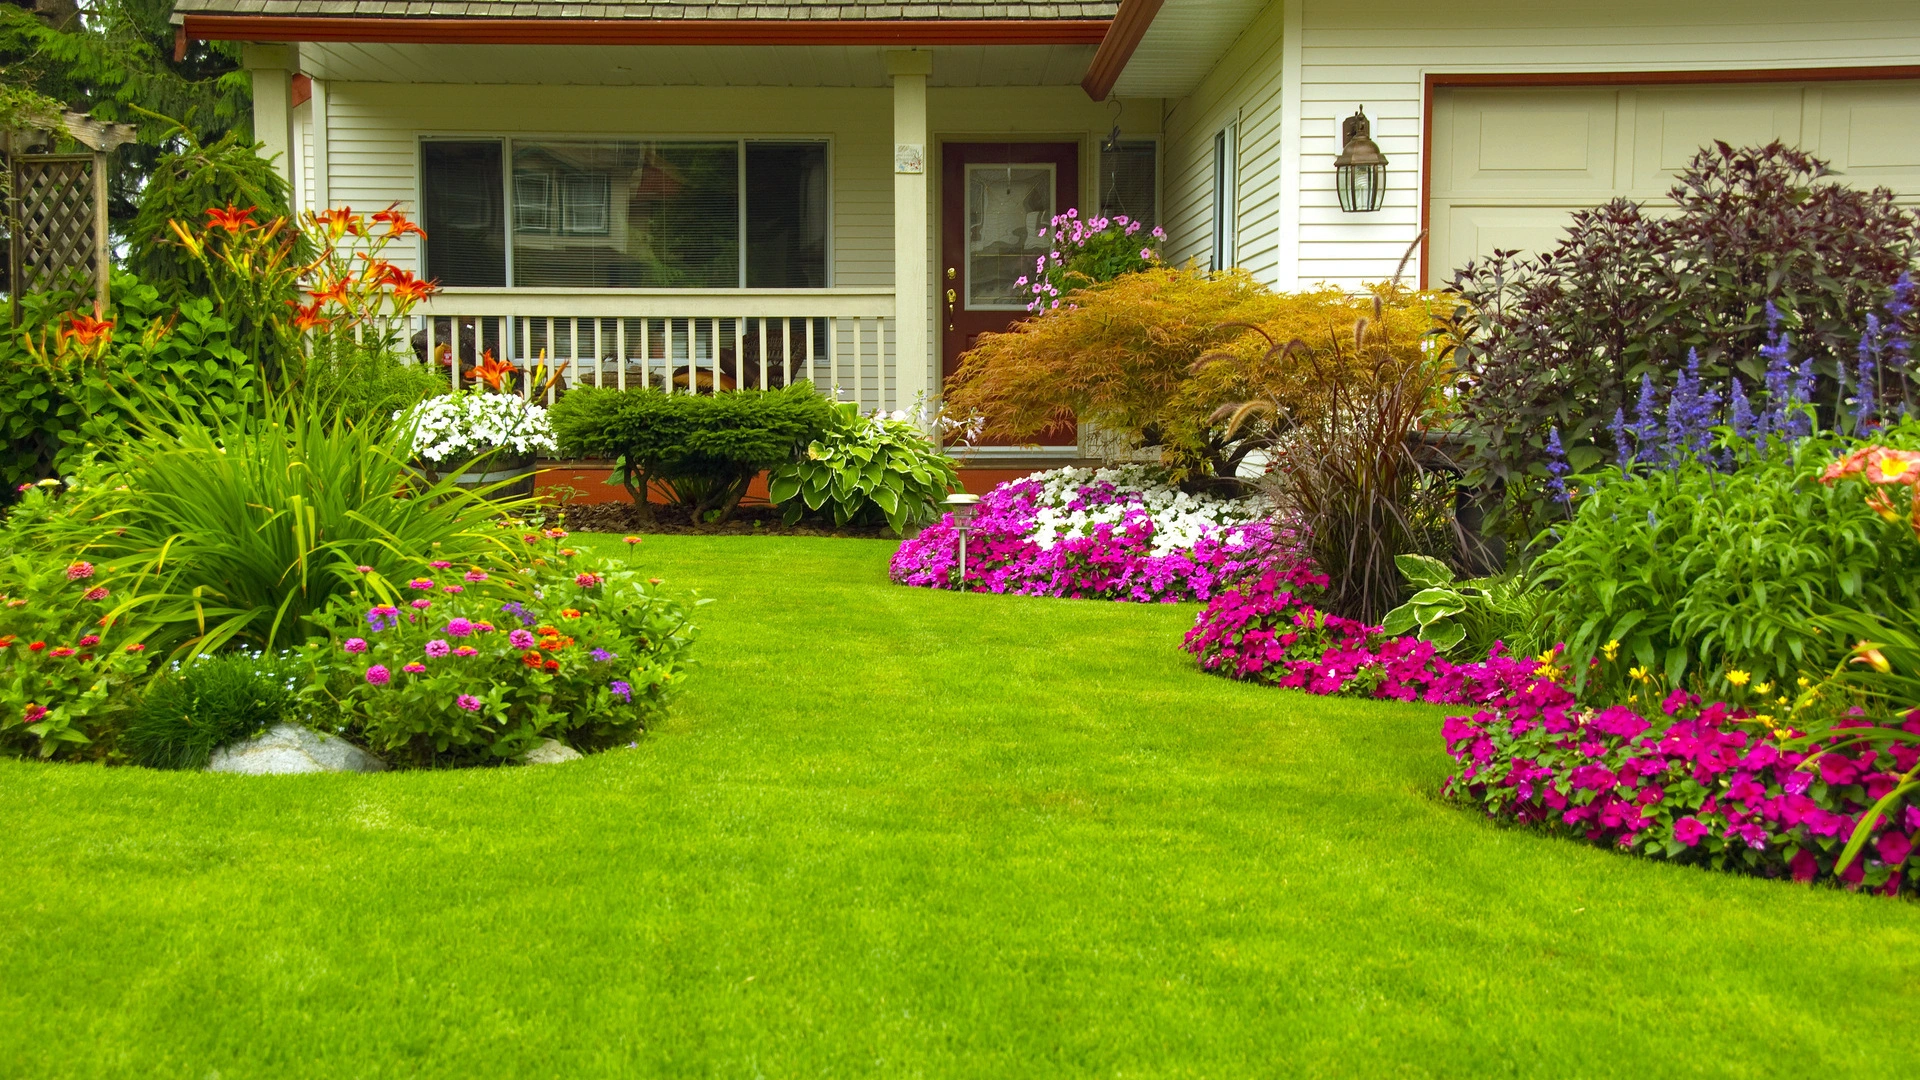 Don’t Forget to Fertilize Your Lawn Multiple Times This Spring!